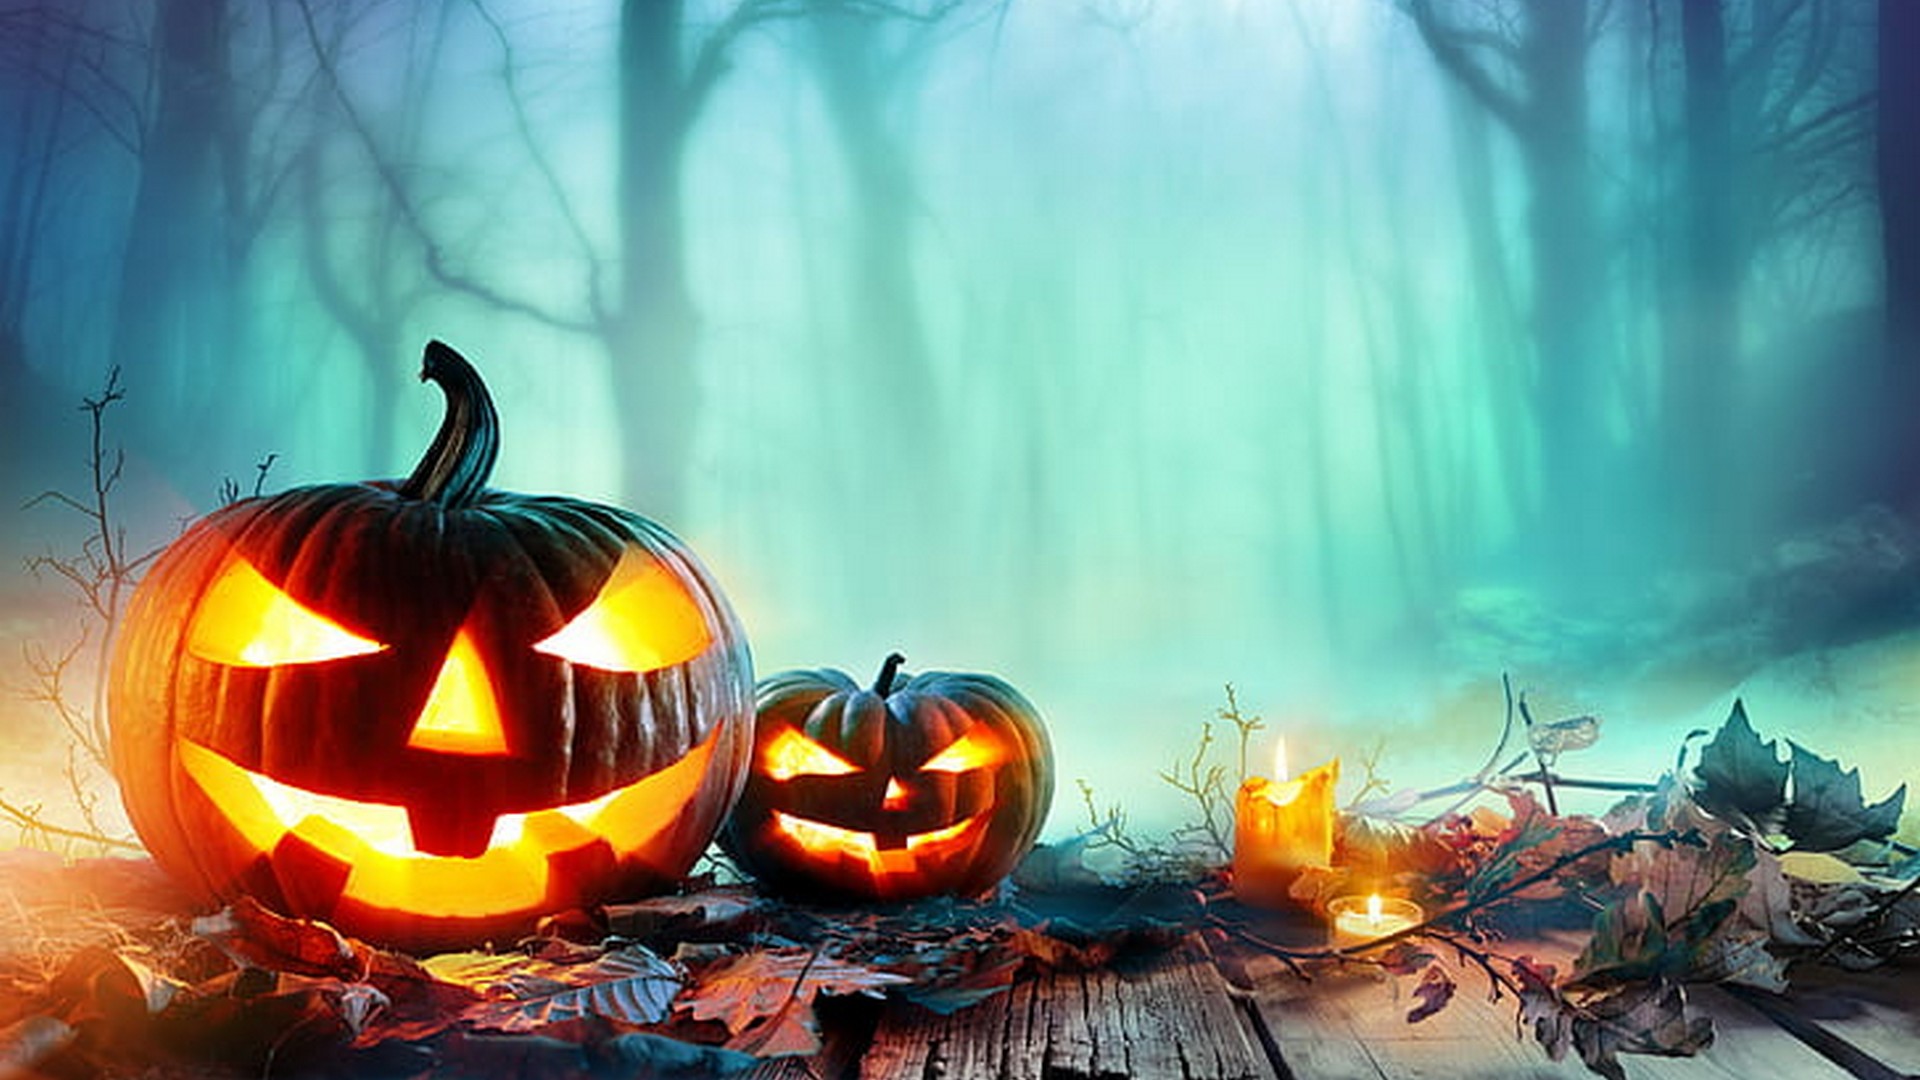 Halloween Aesthetic Background Wallpaper HD With high-resolution 1920X1080 pixel. You can use this wallpaper for your Desktop Computer Backgrounds, Mac Wallpapers, Android Lock screen or iPhone Screensavers and another smartphone device